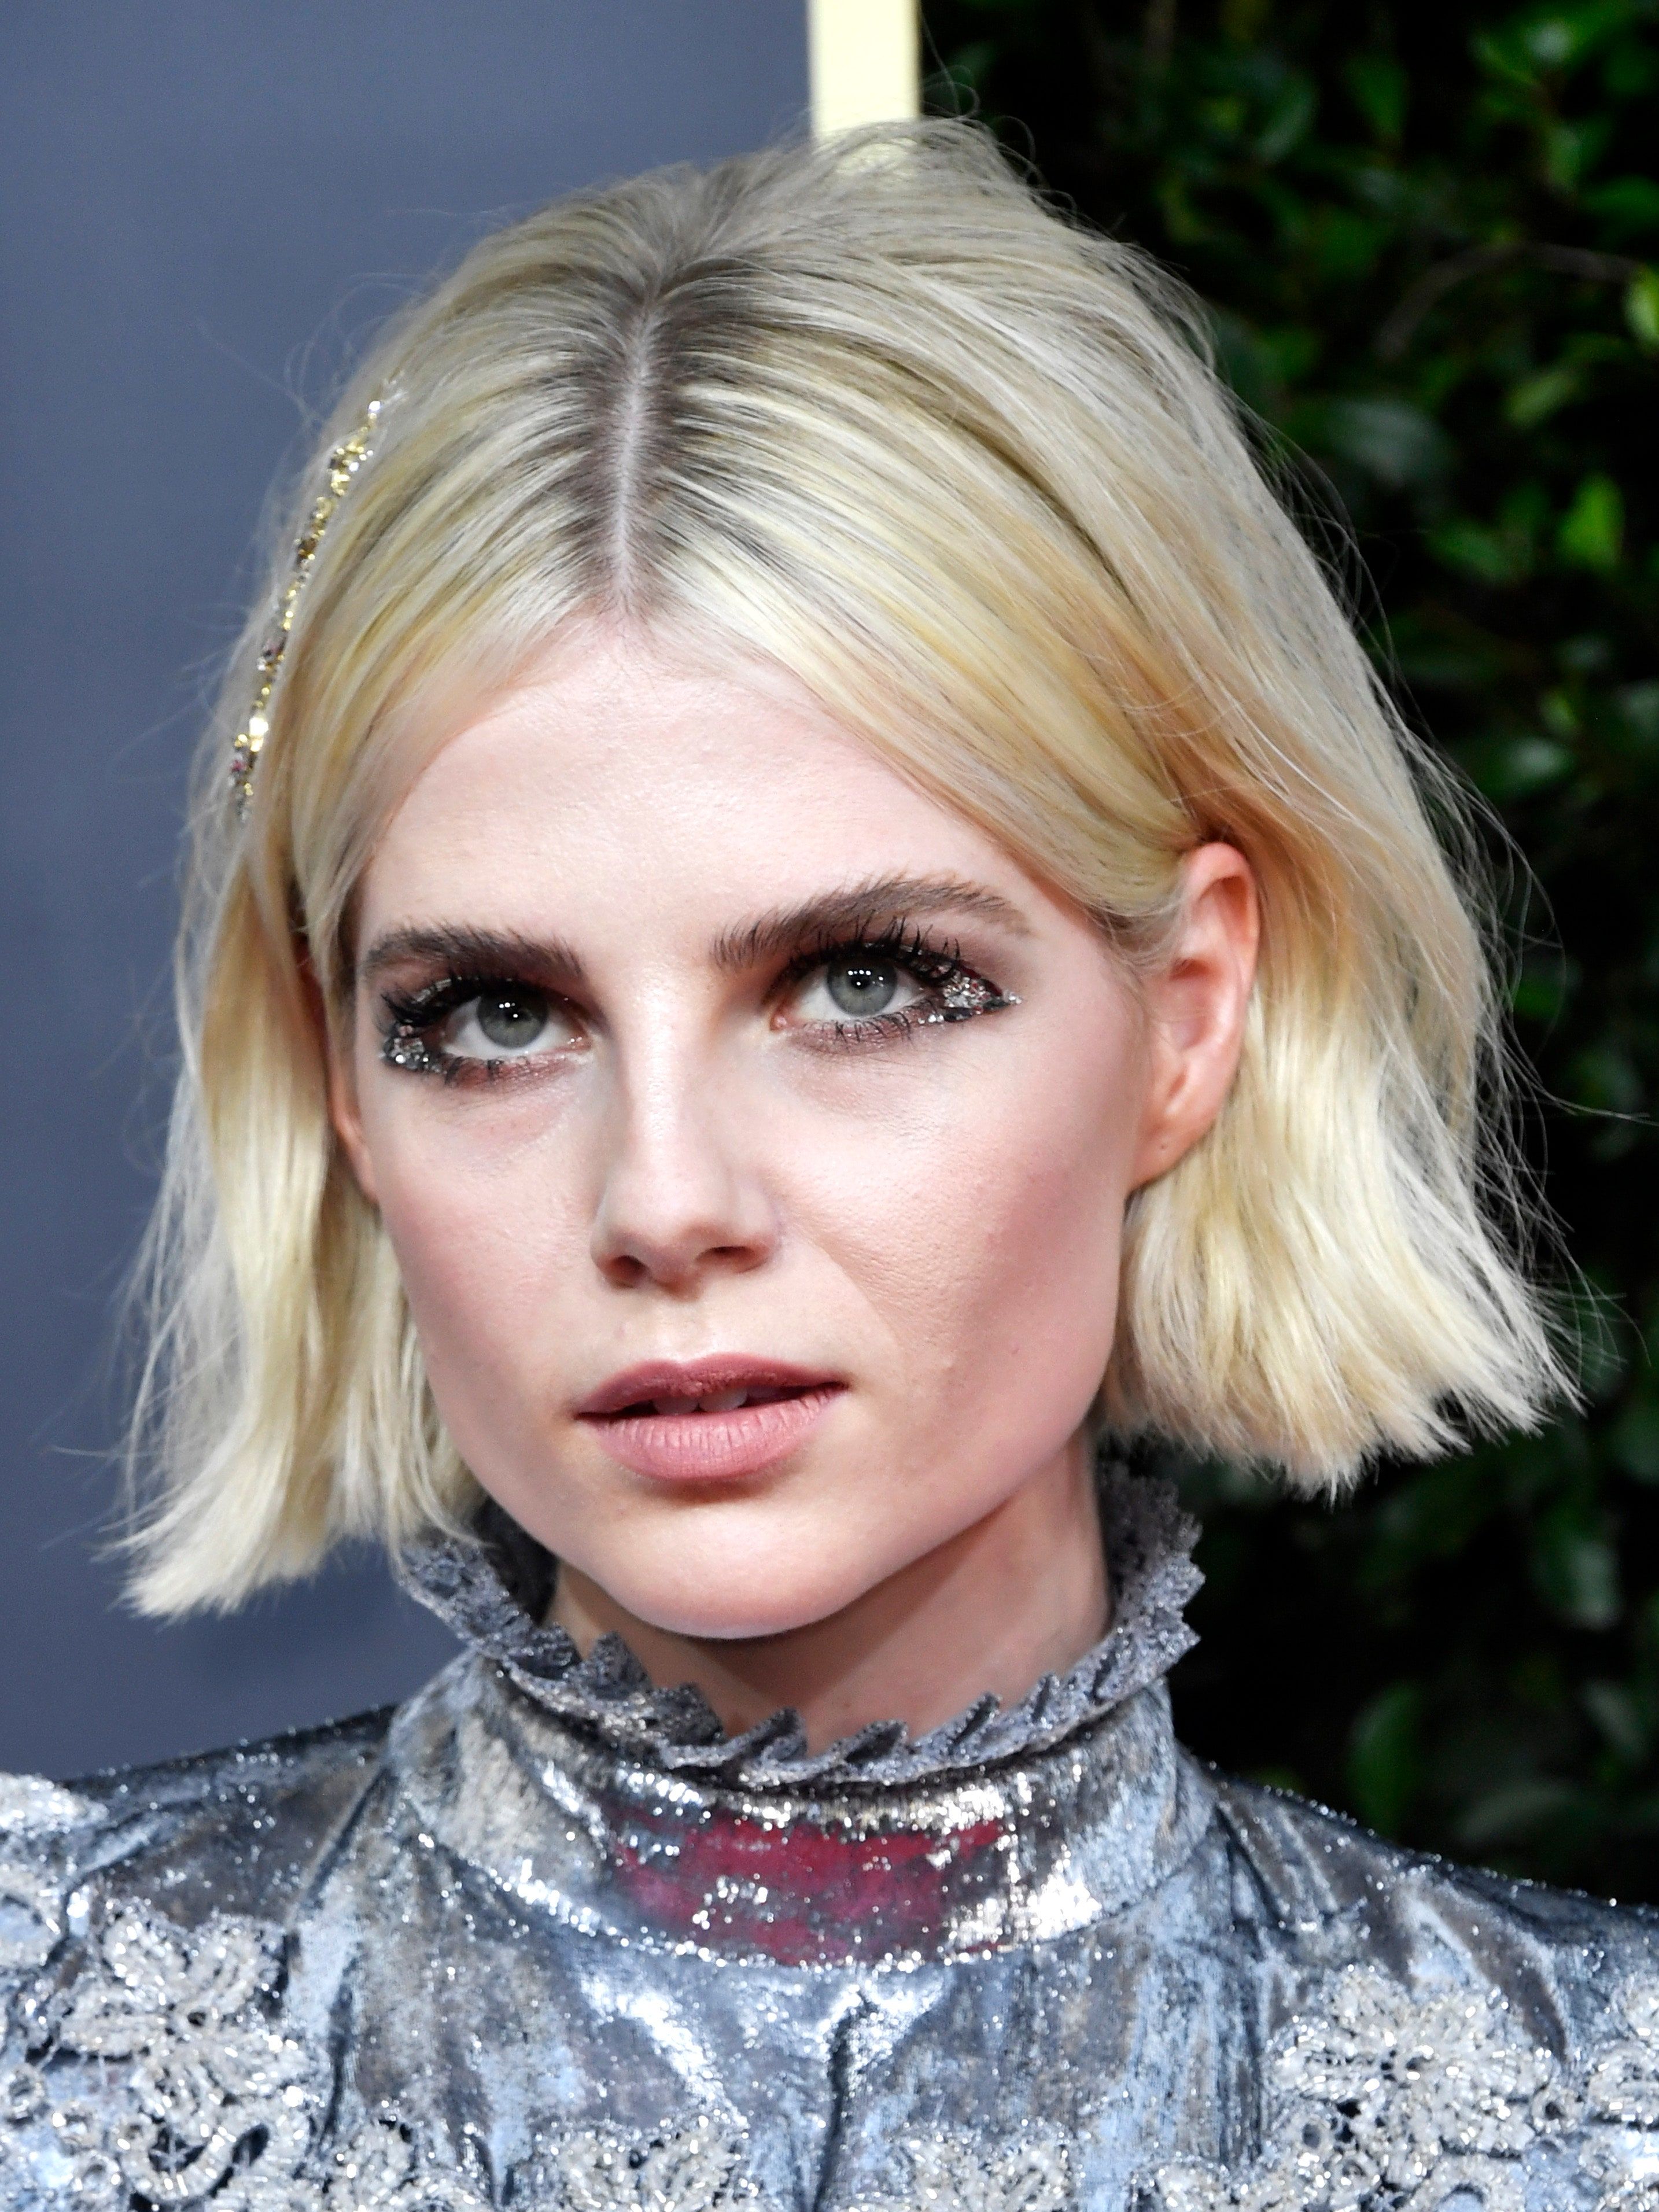 Golden Globes 2020: Lucy Boynton Wore Bedazzled Winged Liner